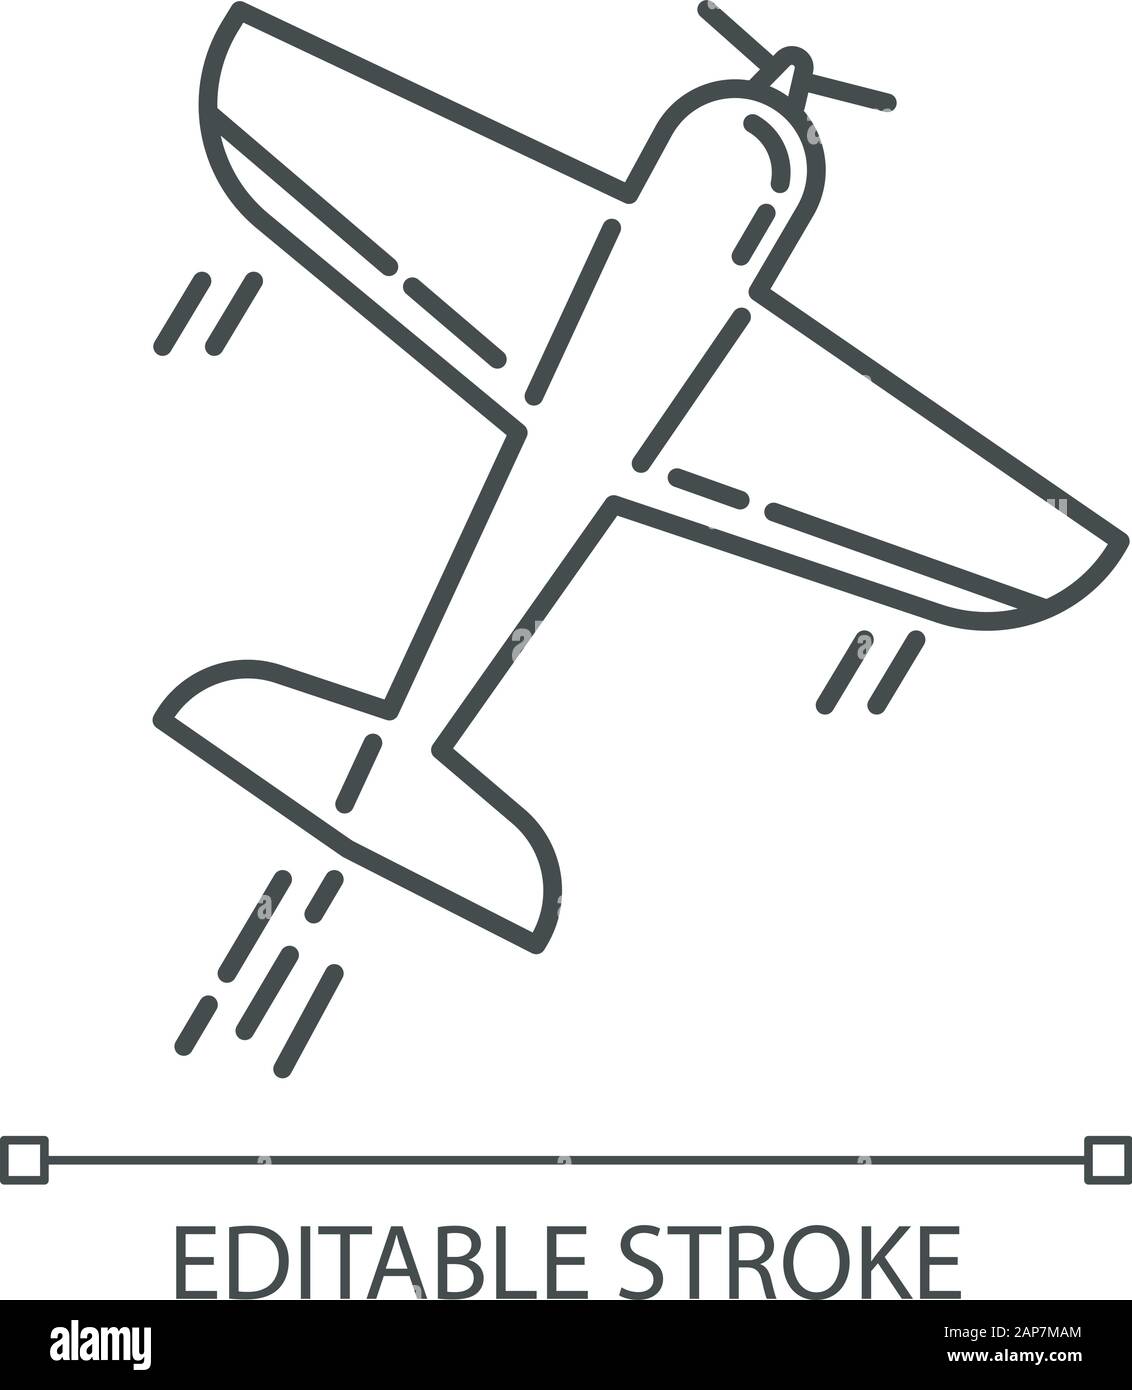 Aerobatics linear icon. Aerobatic maneuvers and stunt flying. Airforce show with plane. Aviation, aircraft performance. Airplanes tricks. Contour symb Stock Vector